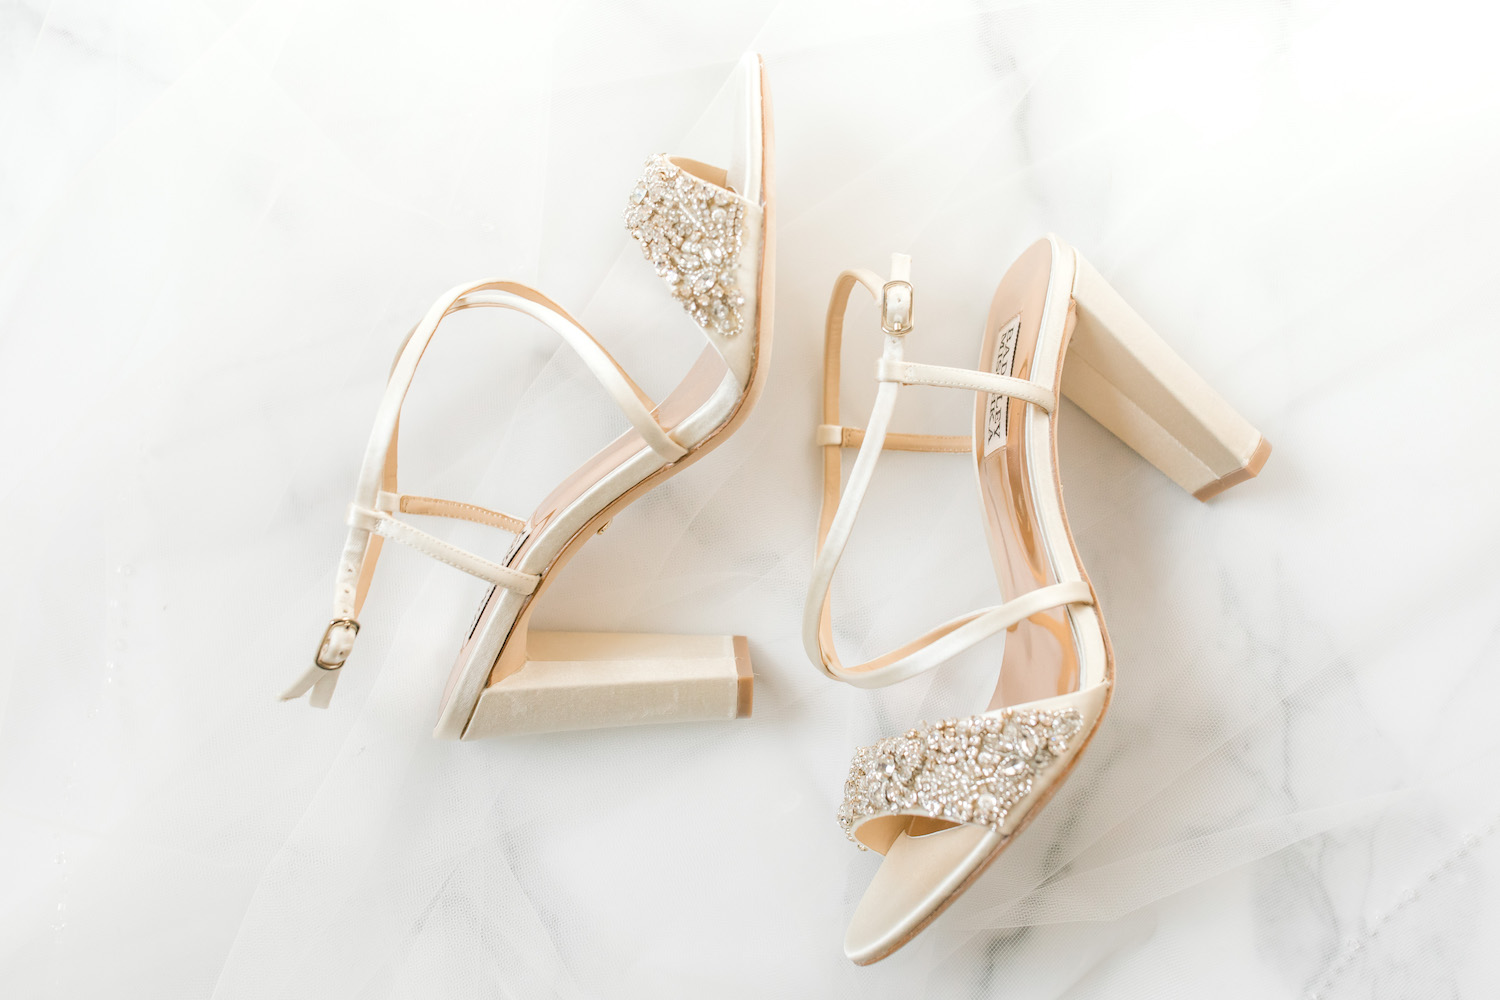 Brides shoes for her City Flats Hotel wedding